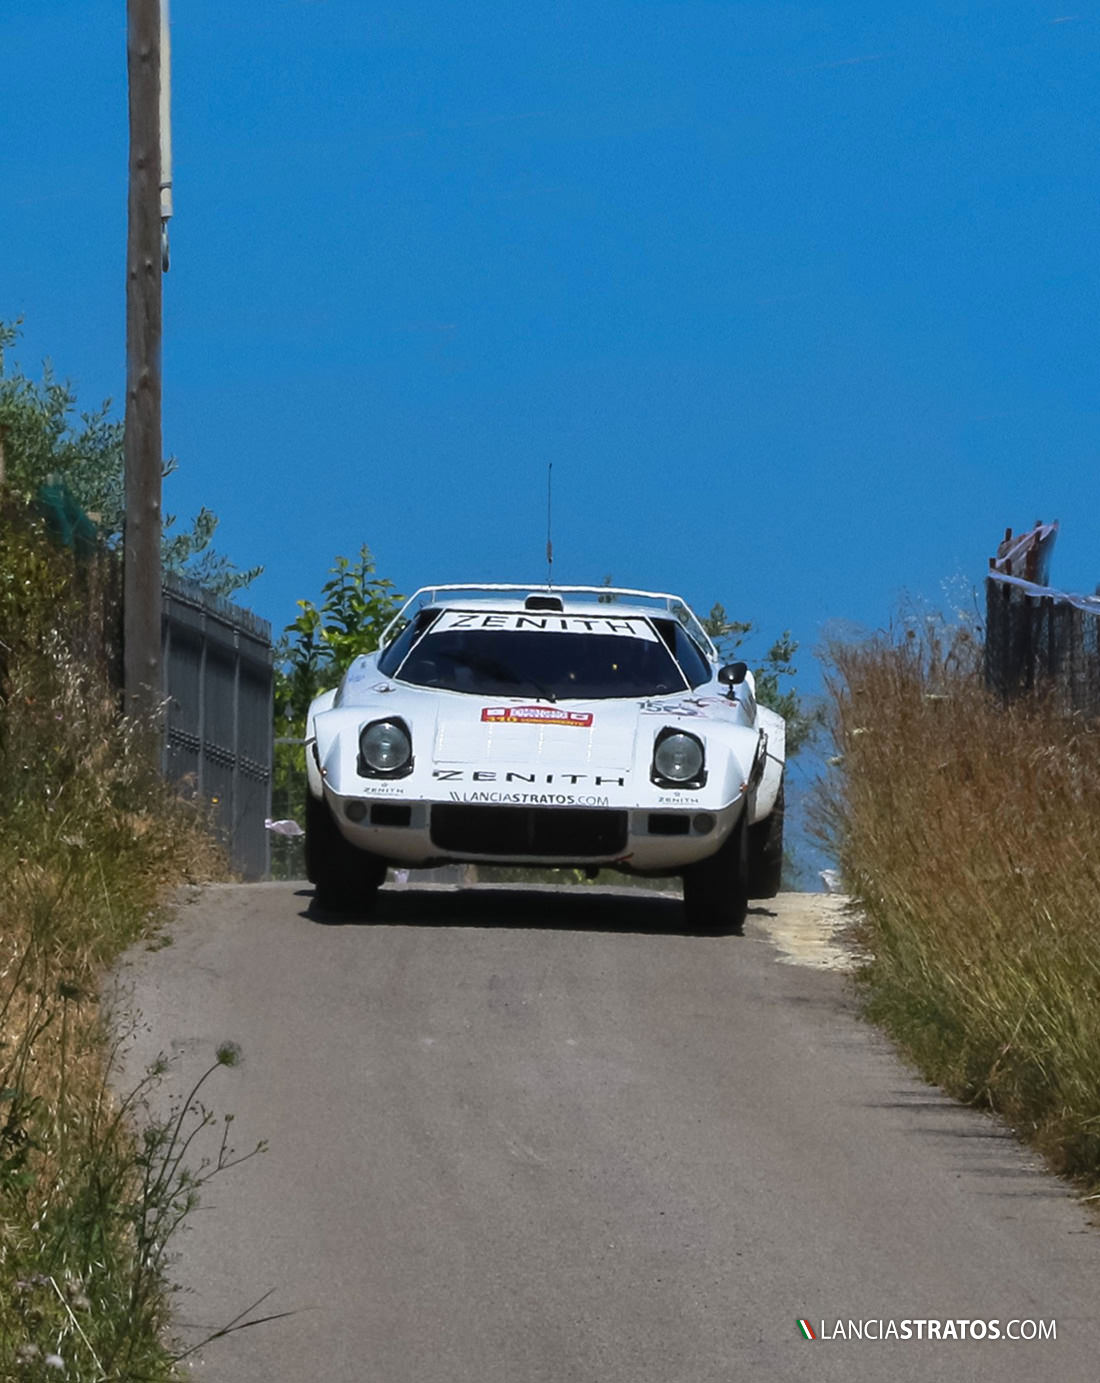 Front Lancia Stratos in race